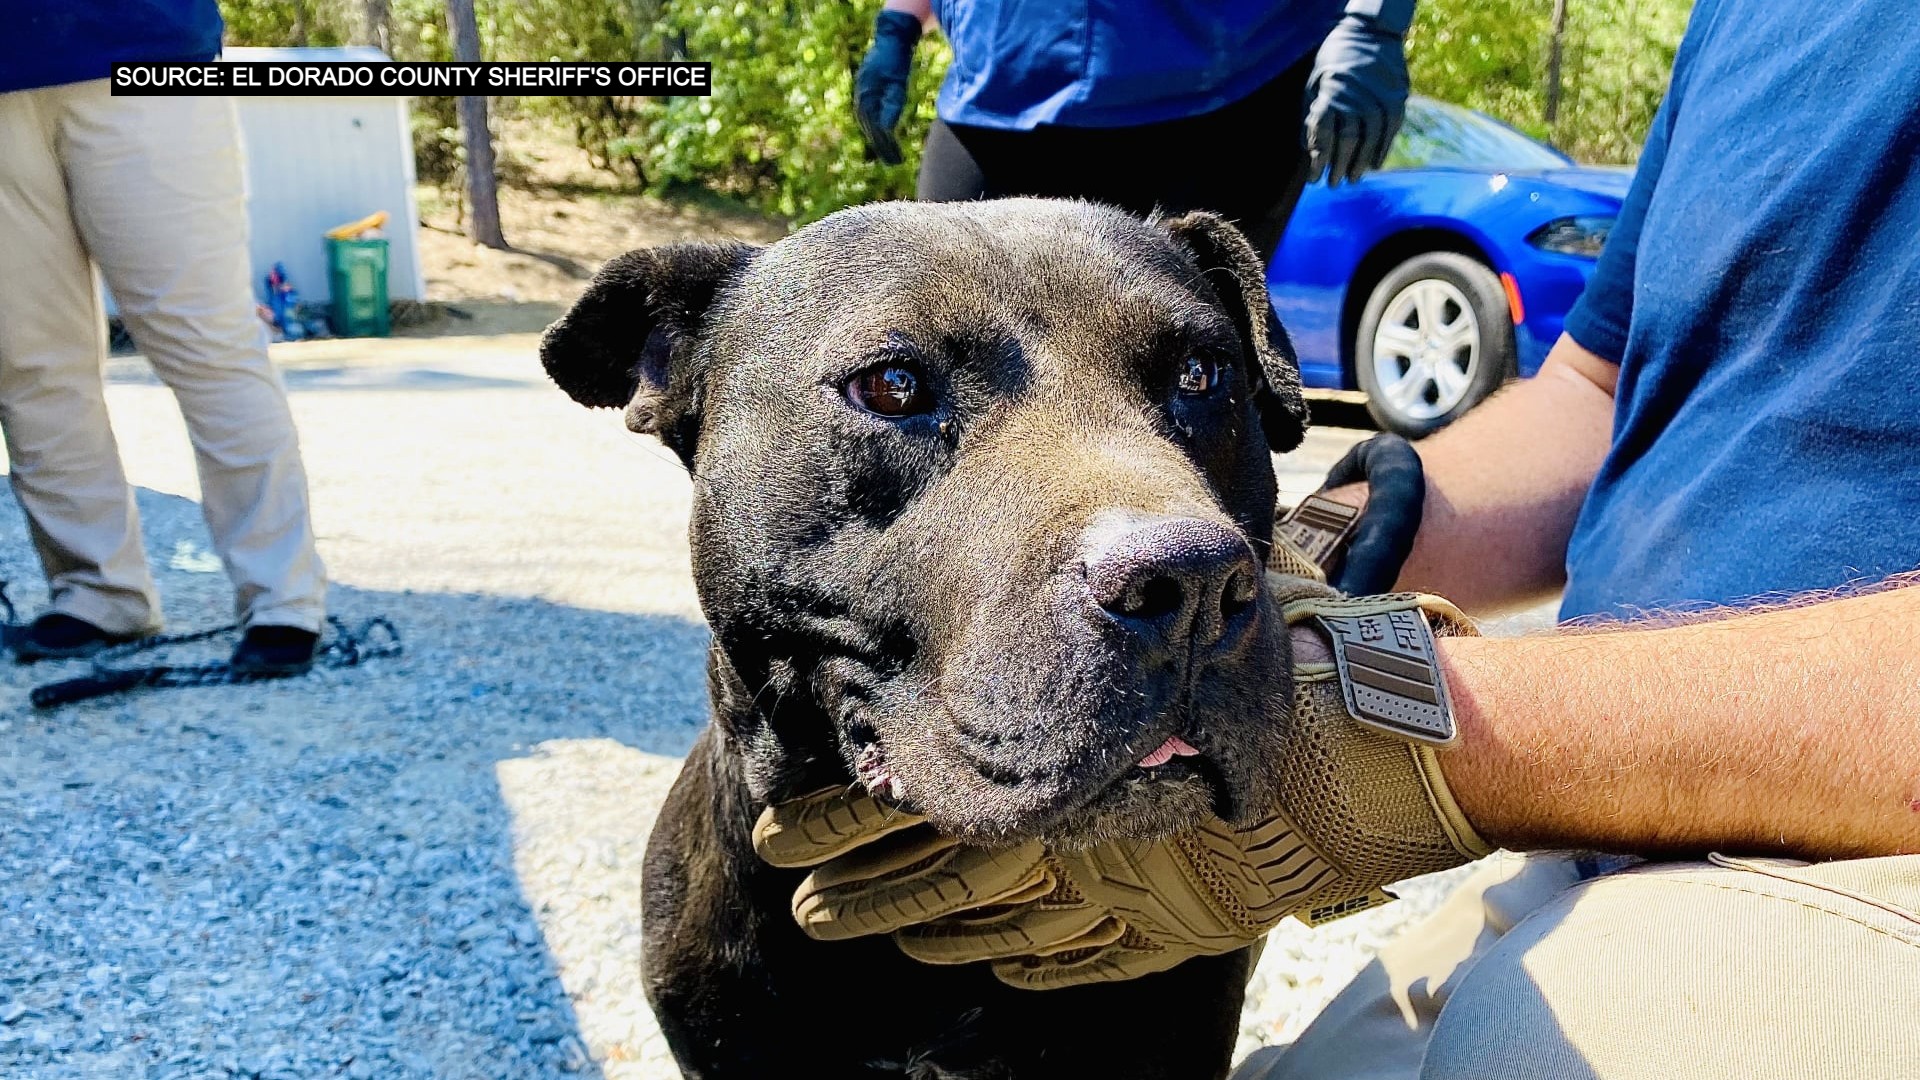 Man Arrested In Placerville Dog Fighting Bust Identified – CBS Sacramento